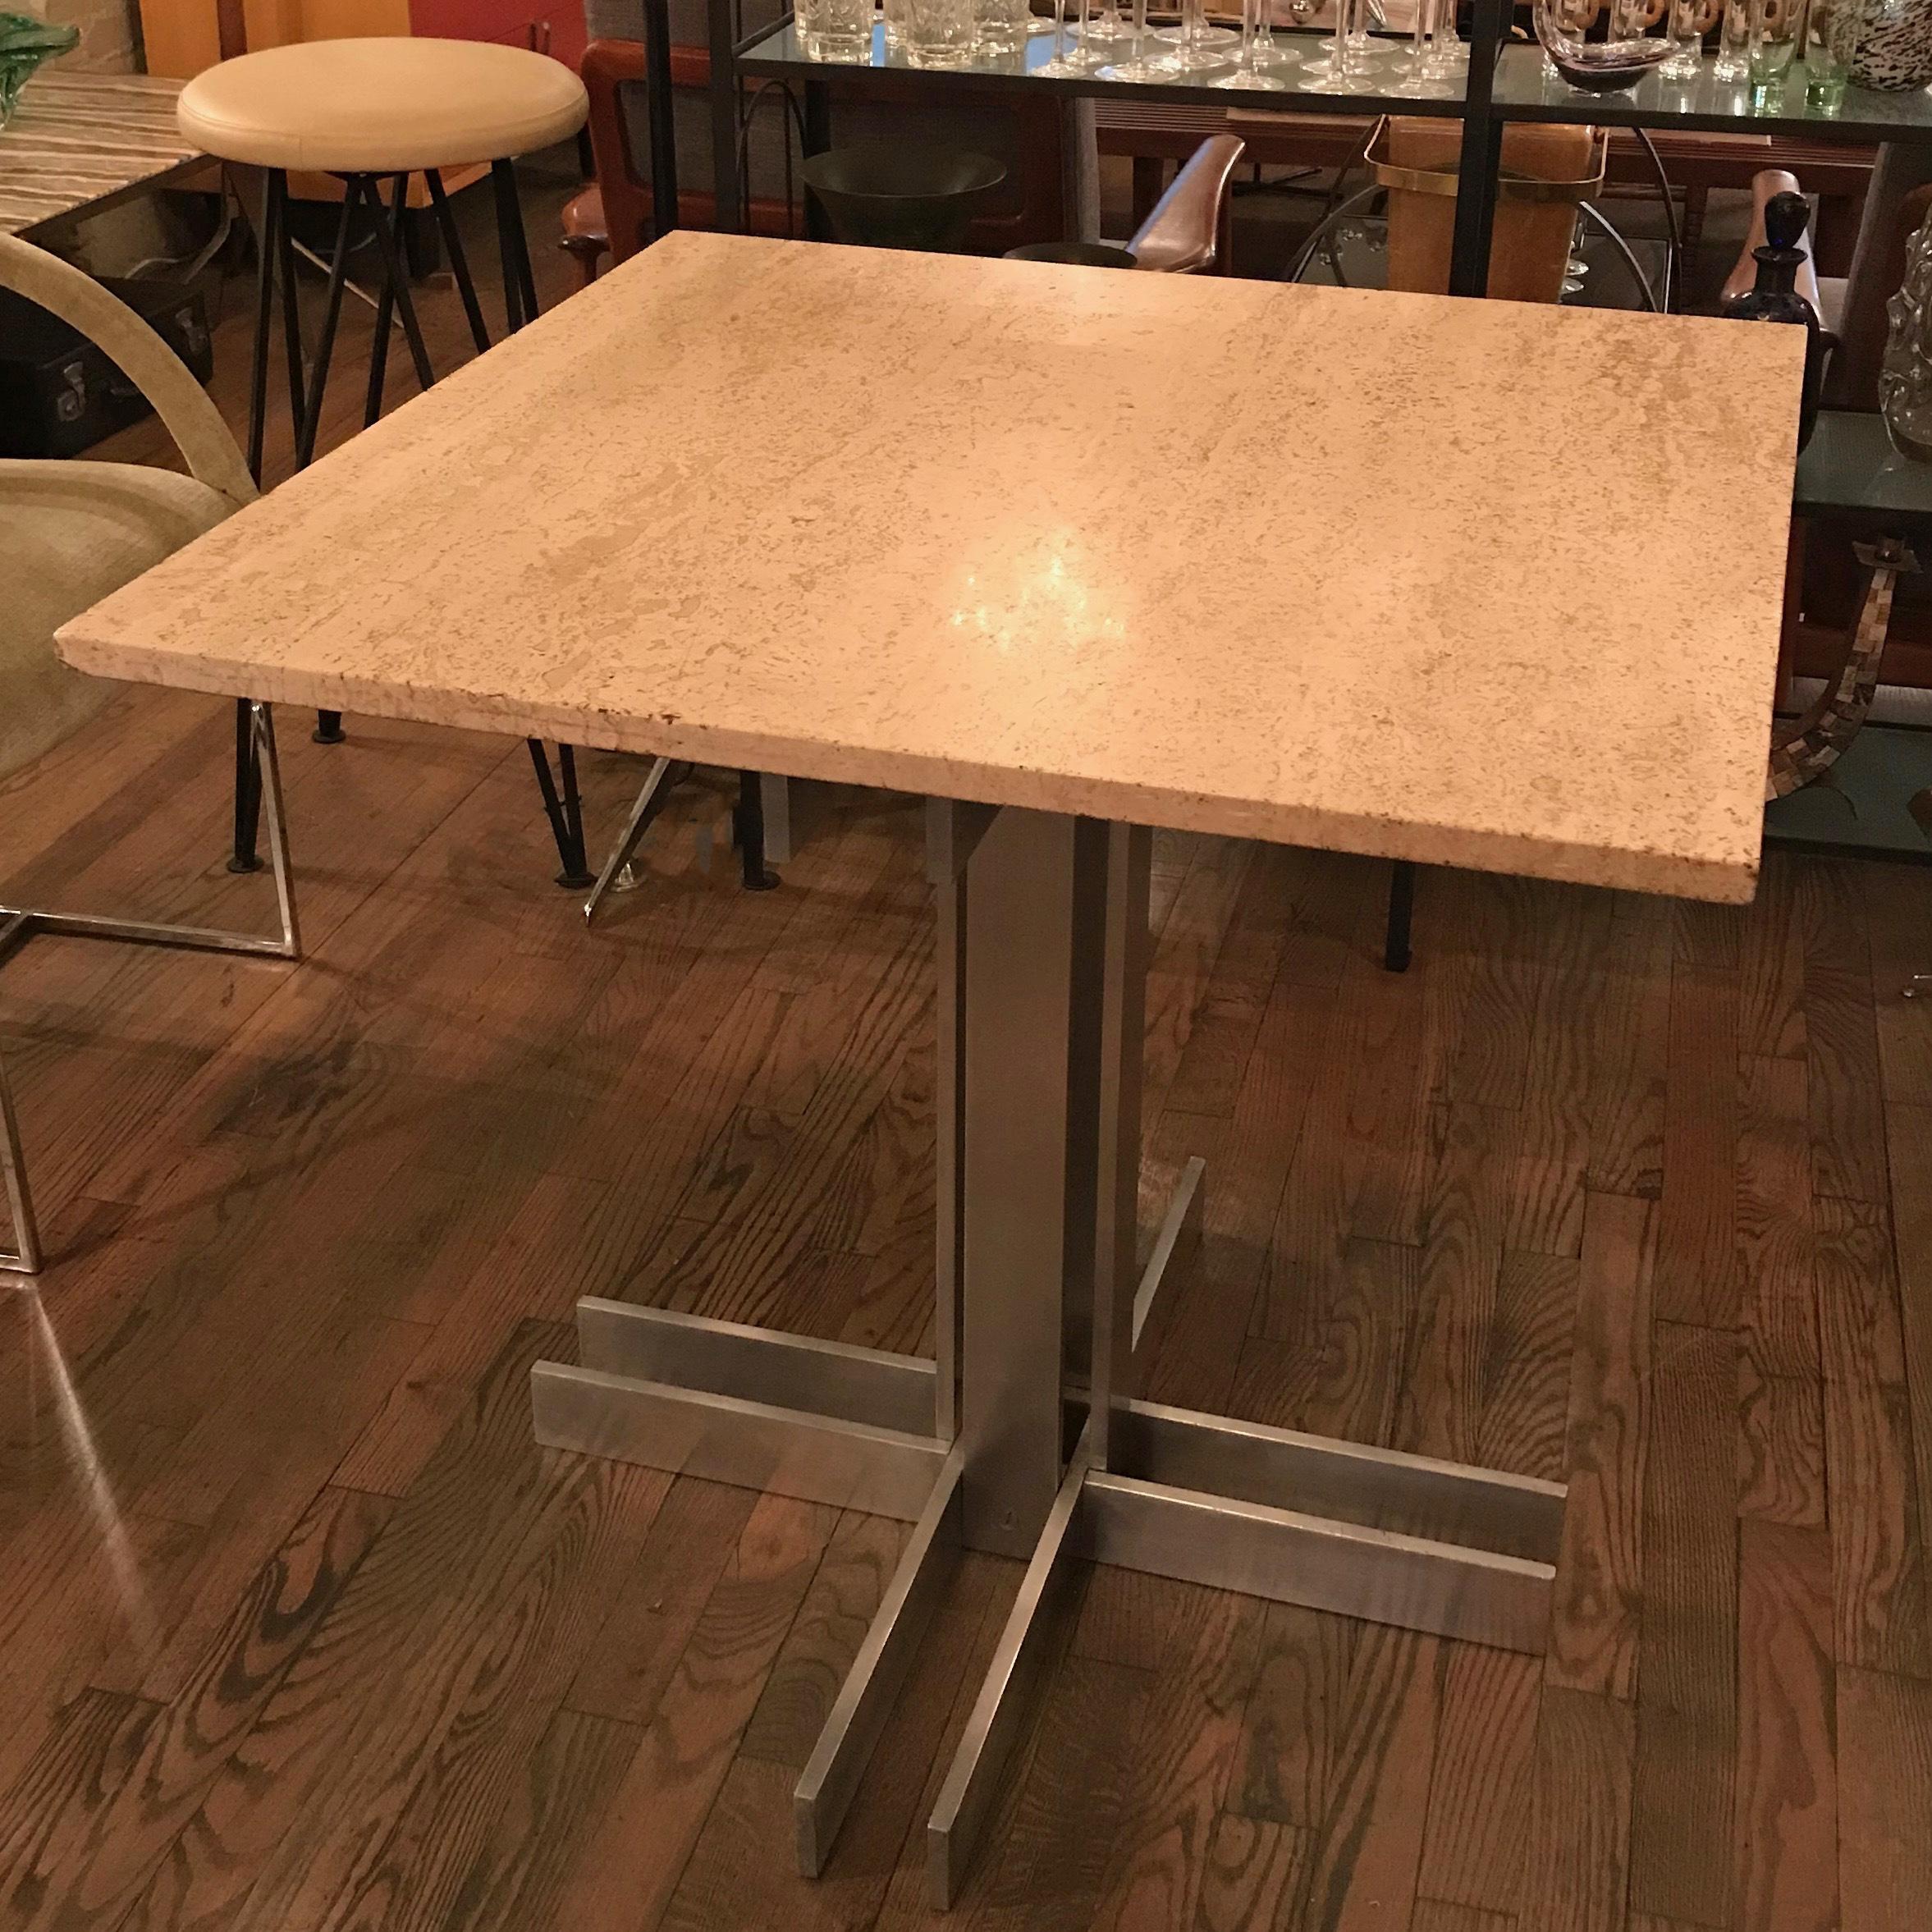 Postmodern, Memphis influenced, small dining or bistro café table features a square travertine top paired with a post-modern, architectural, machined-aluminum, pedestal base.